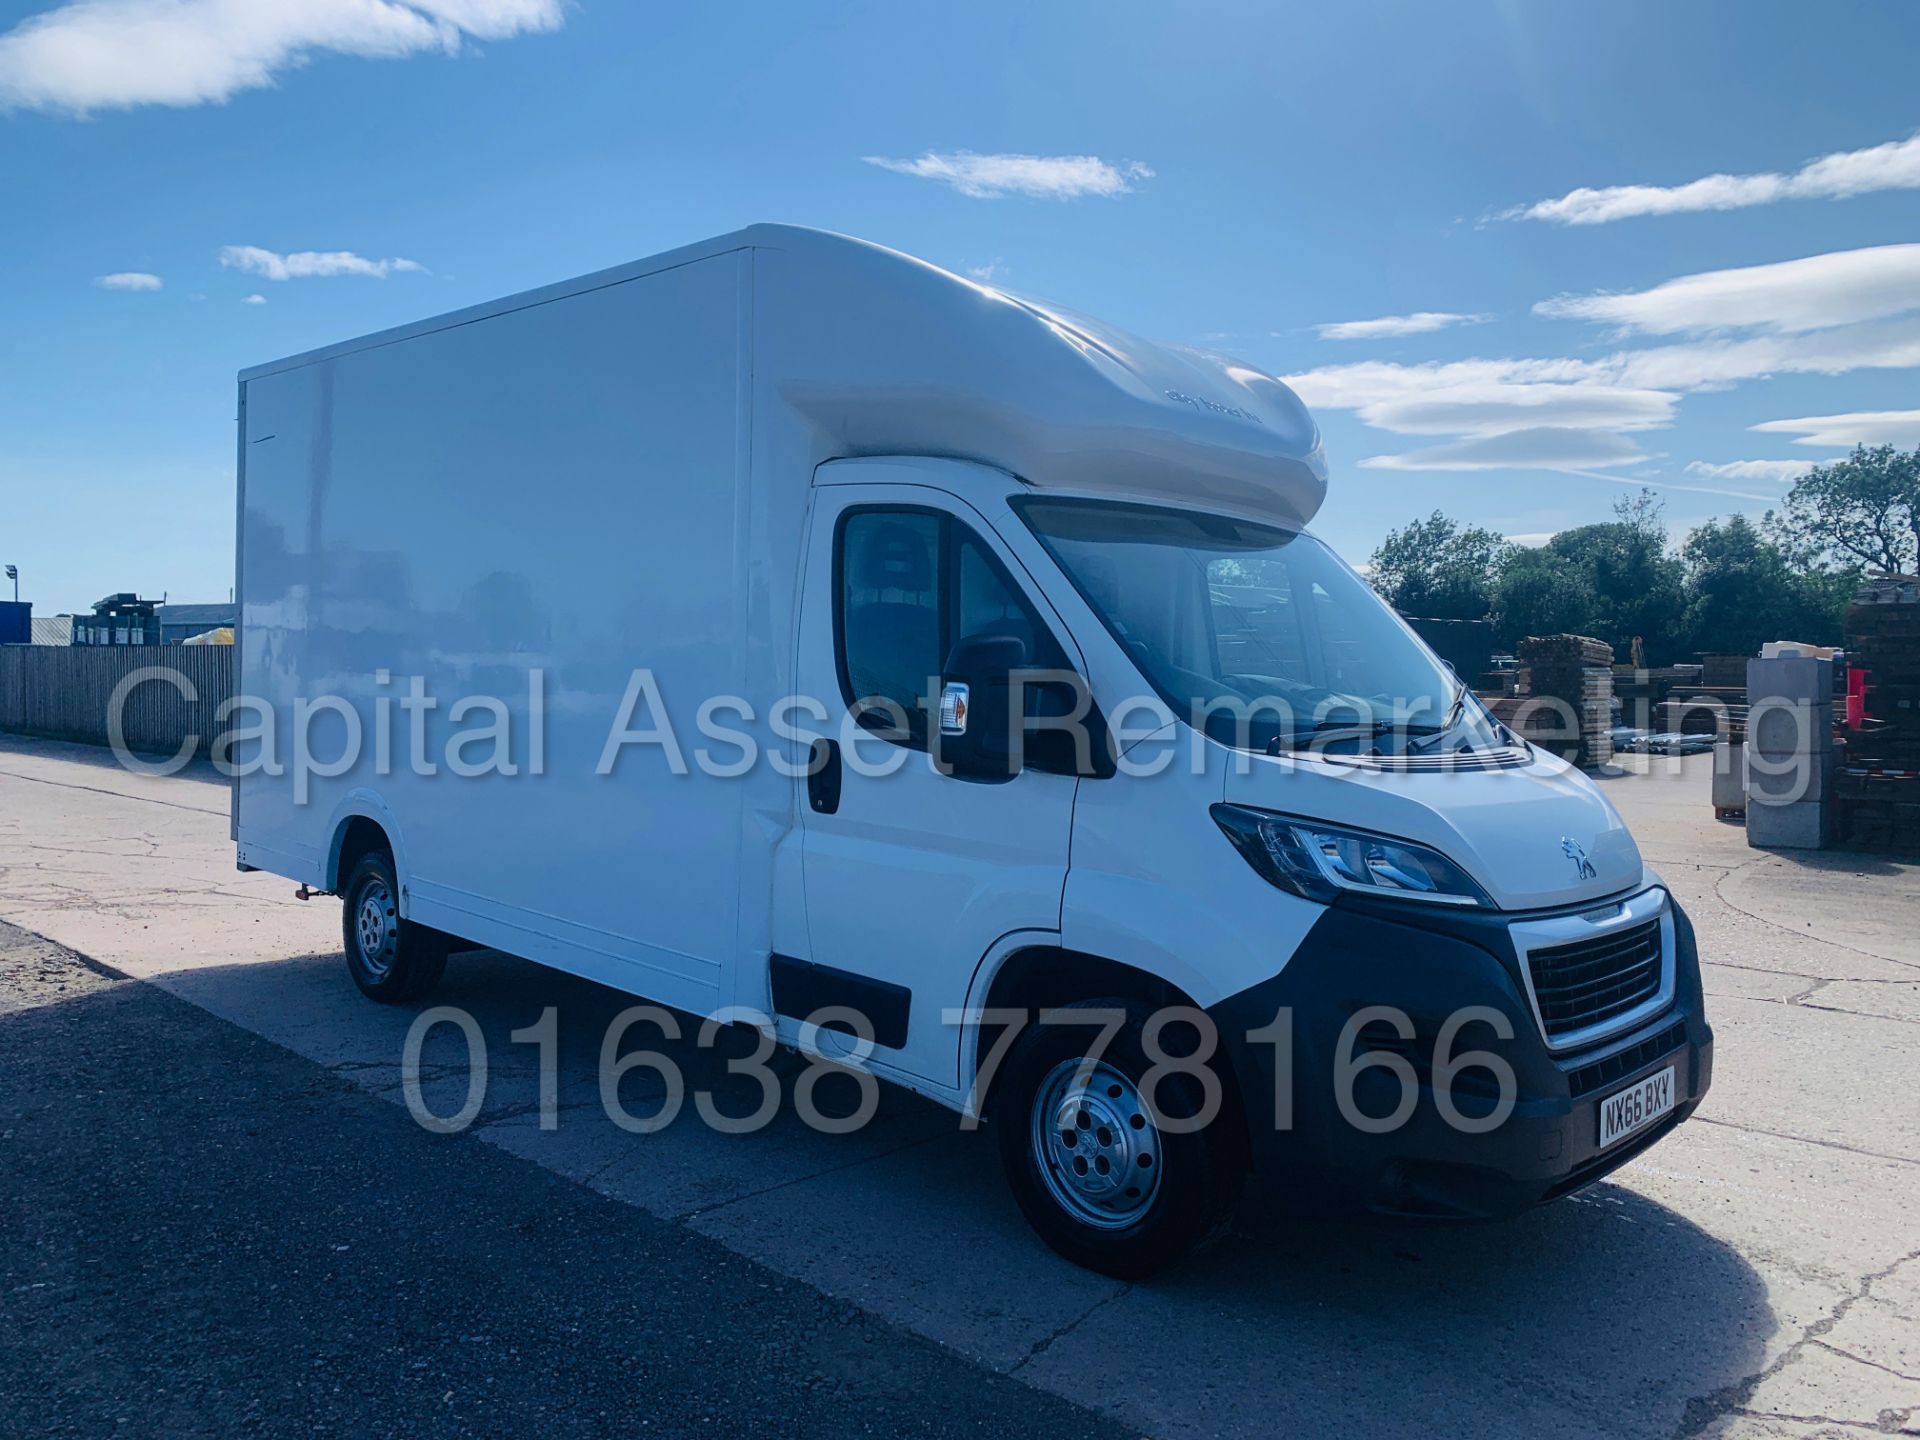 ON SALE PEUGEOT BOXER *LWB- LO-LOADER / LUTON* (2017 - EURO 6) '2.2 HDI - 6 SPEED' (1 OWNER - FSH - Image 2 of 35